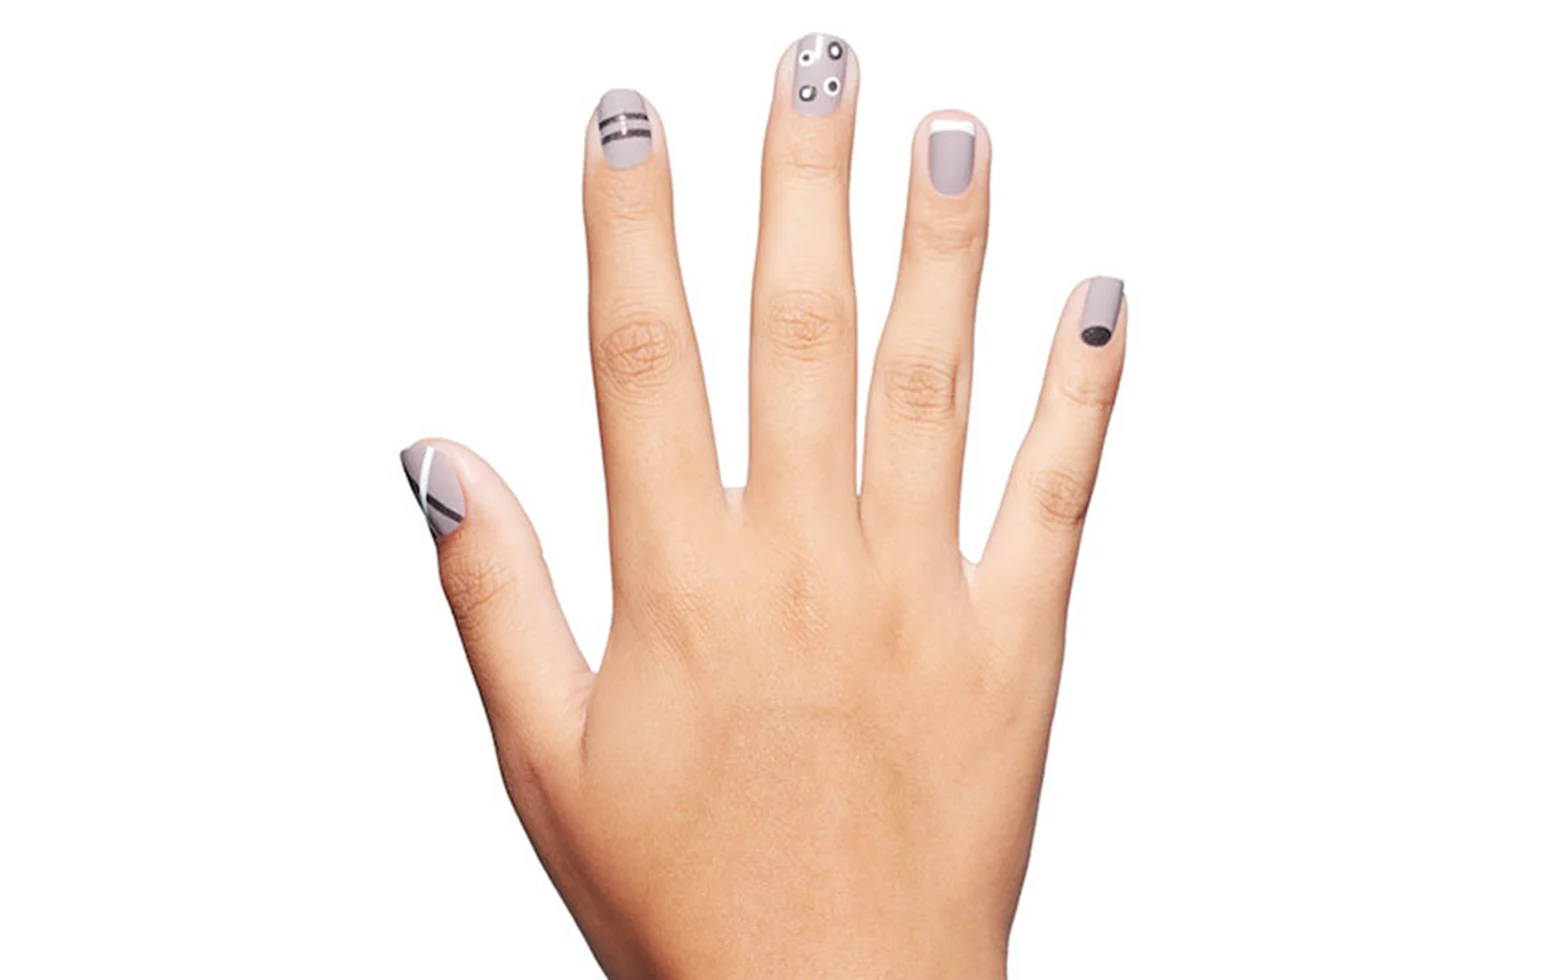 5. Simple Nail Art Designs You Can Do Yourself - wide 4